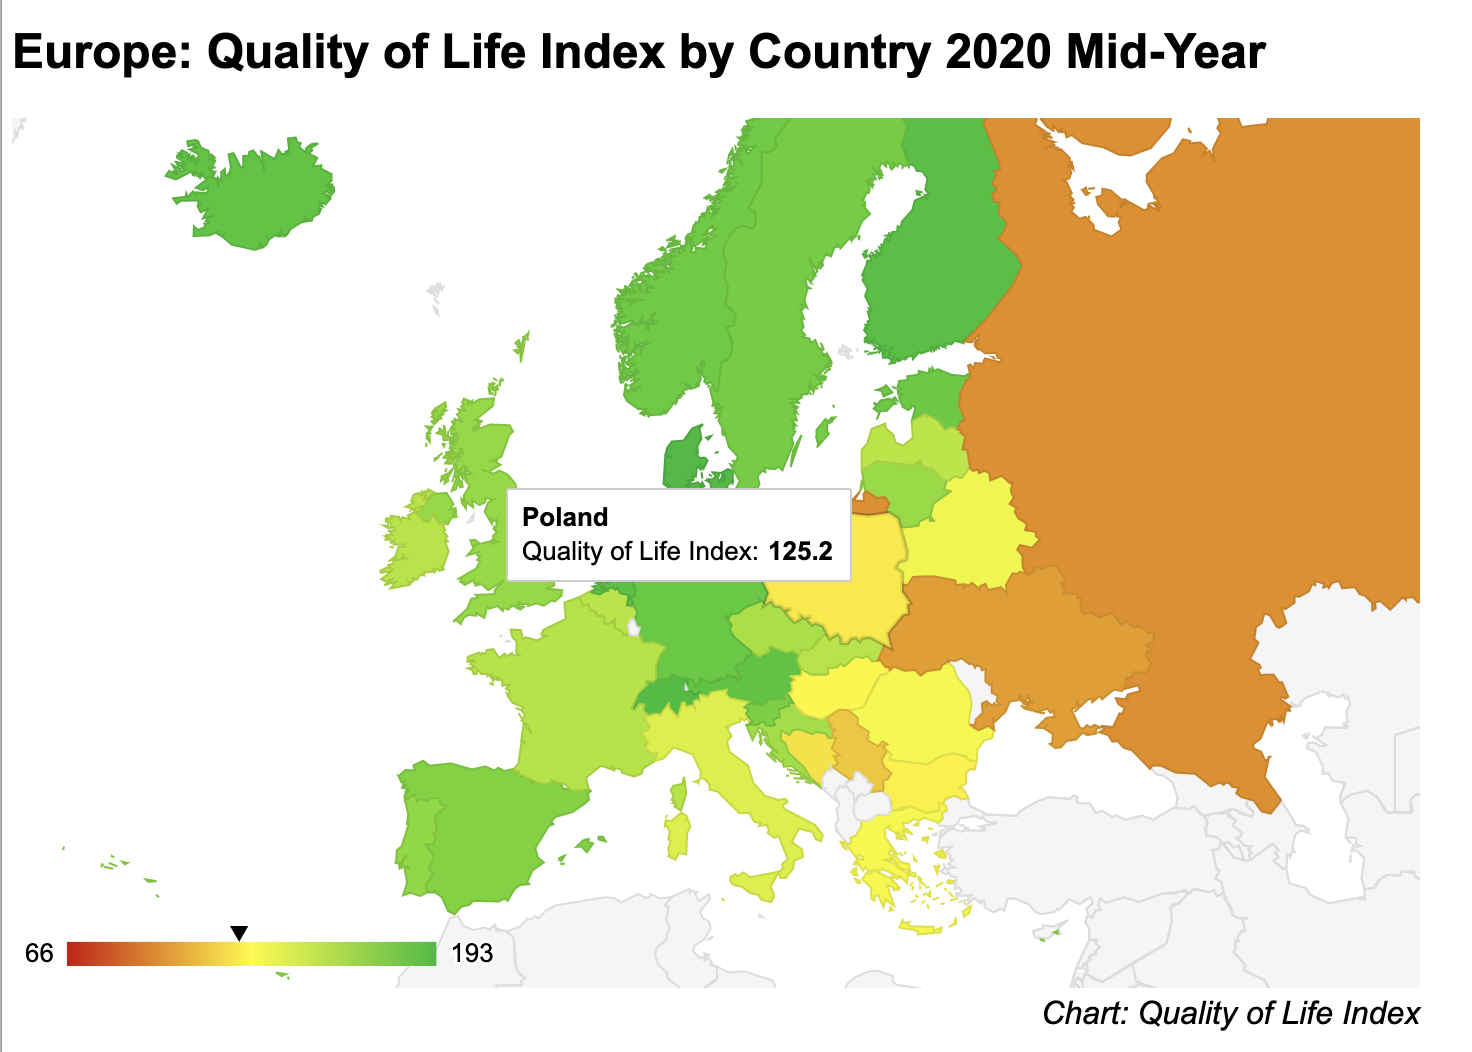 Poland in the lead – but where?